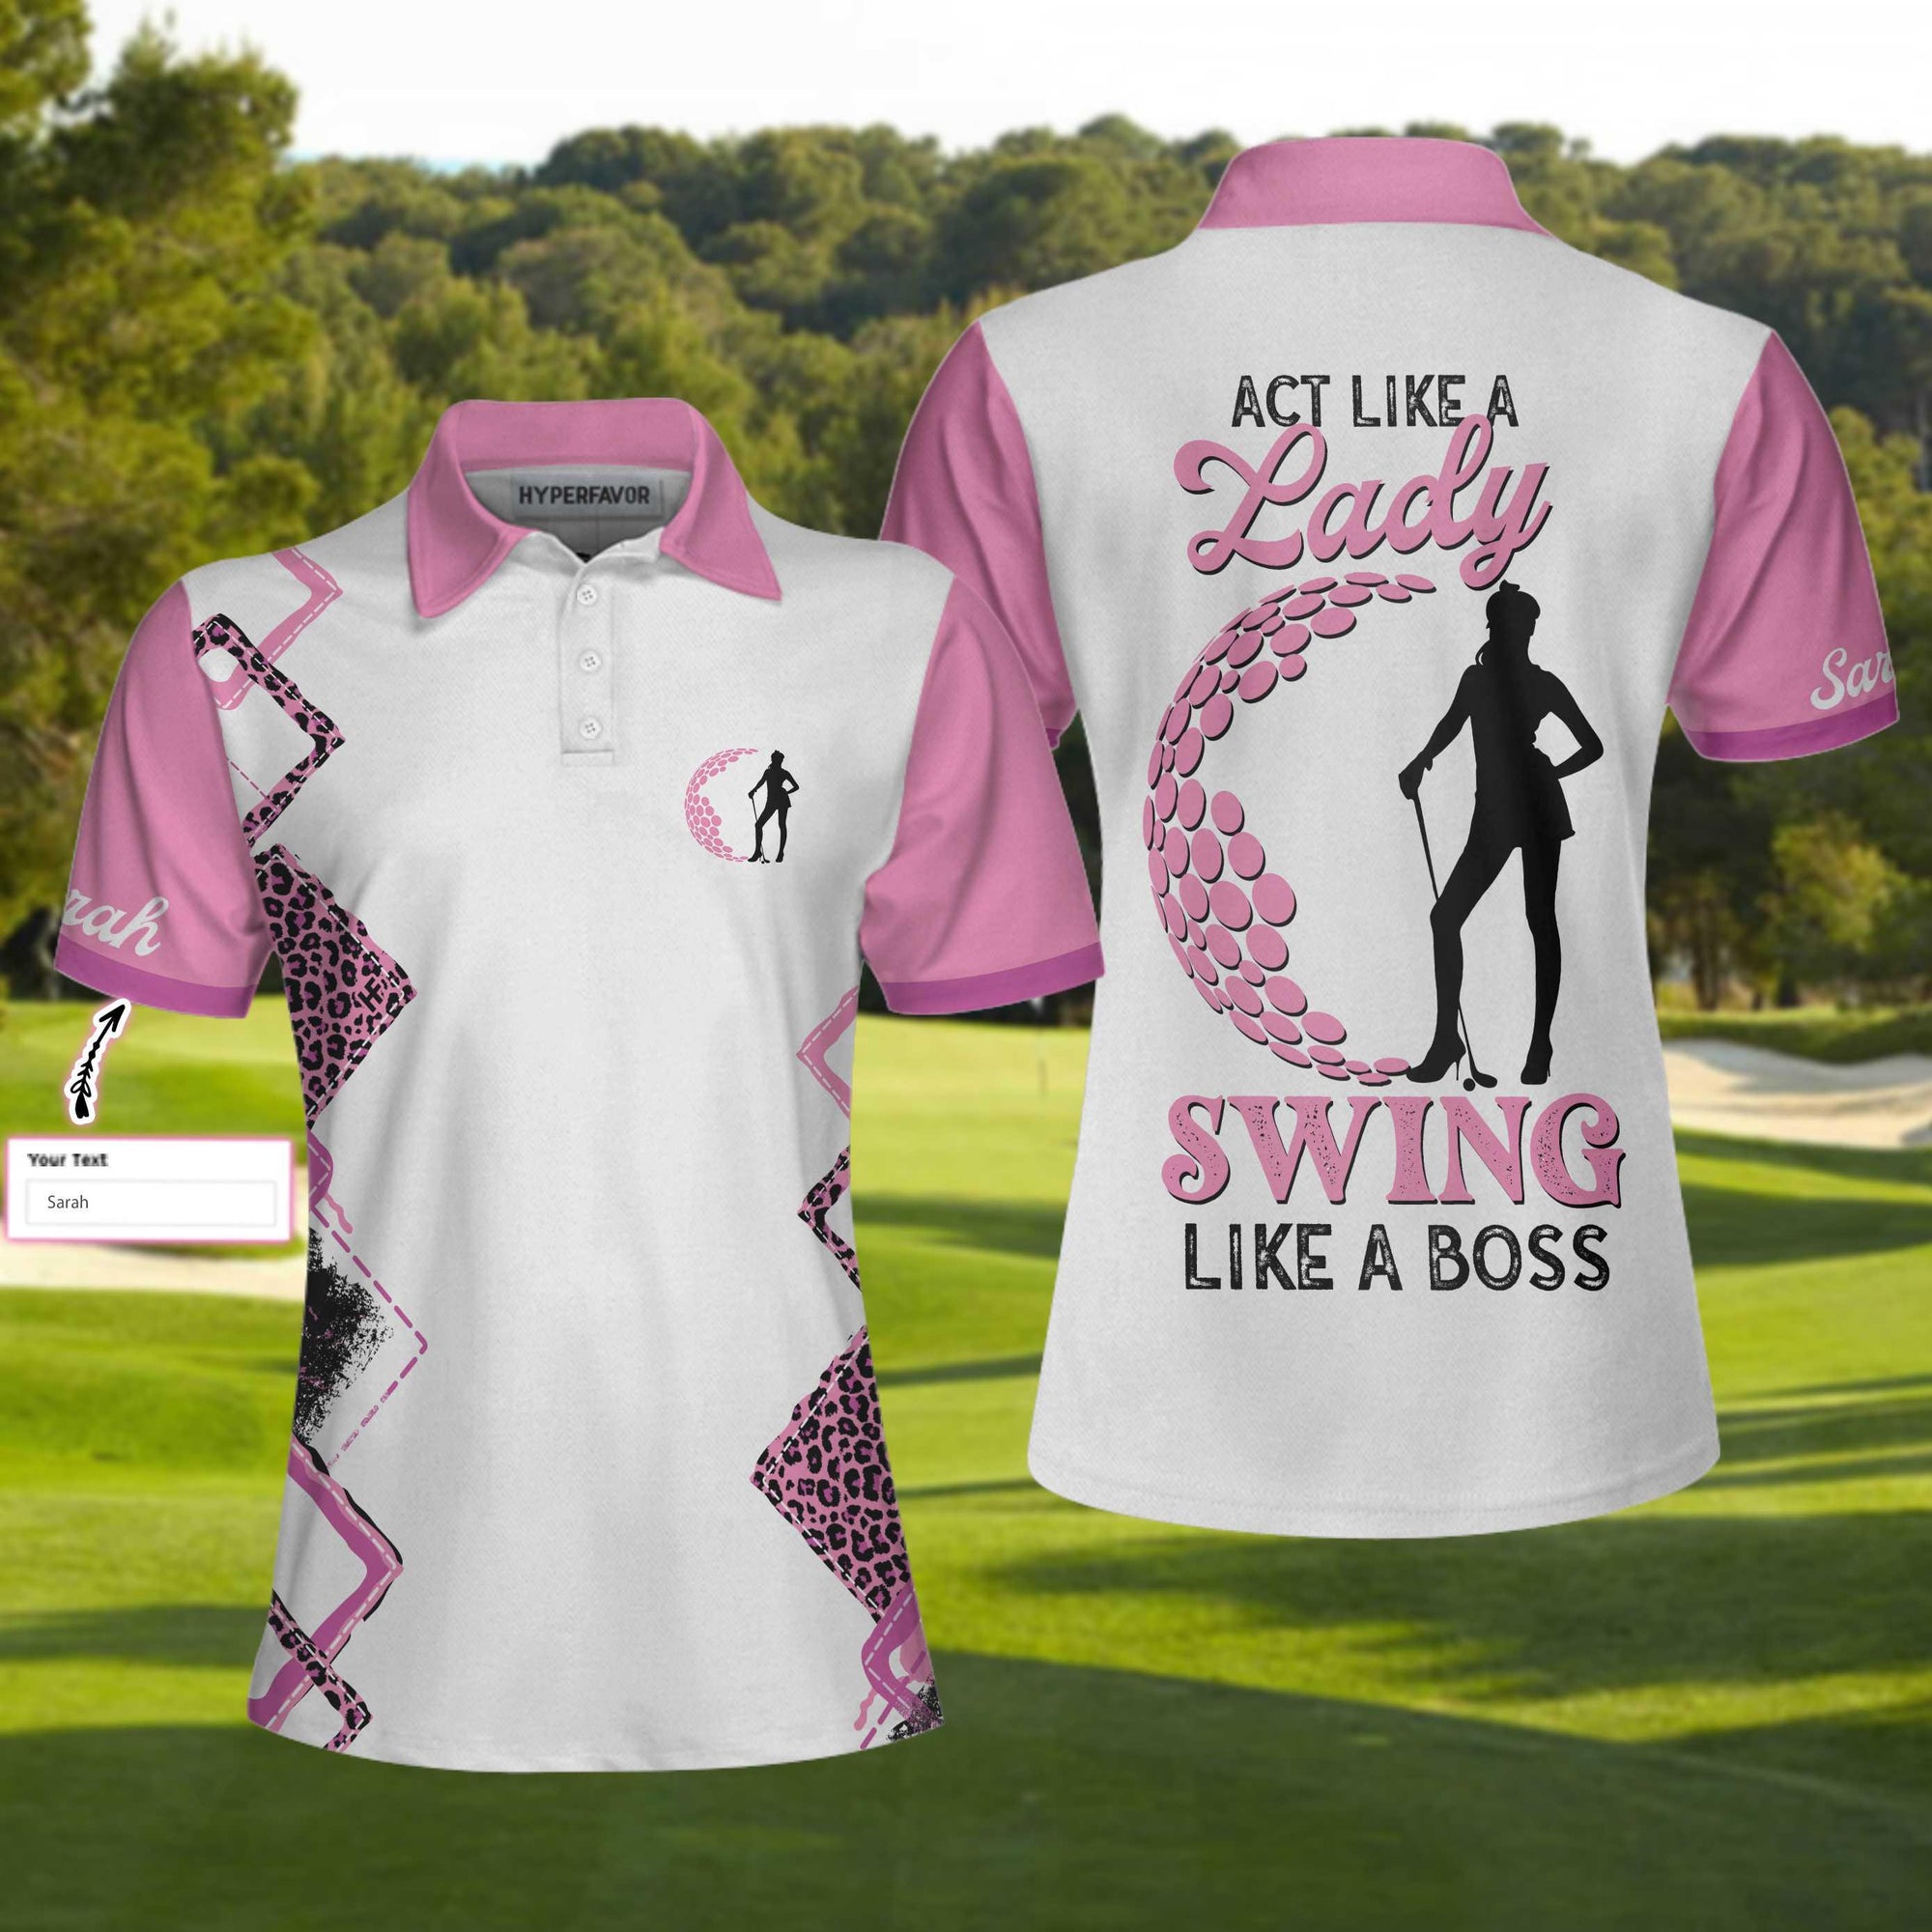 Golf Custom Name Women Polo Shirt, Golf Act Like A Lady, Leopard Pattern Personalized Women Polo Shirts With Sayings, Best Gift For Female Golfers - Amzanimalsgift